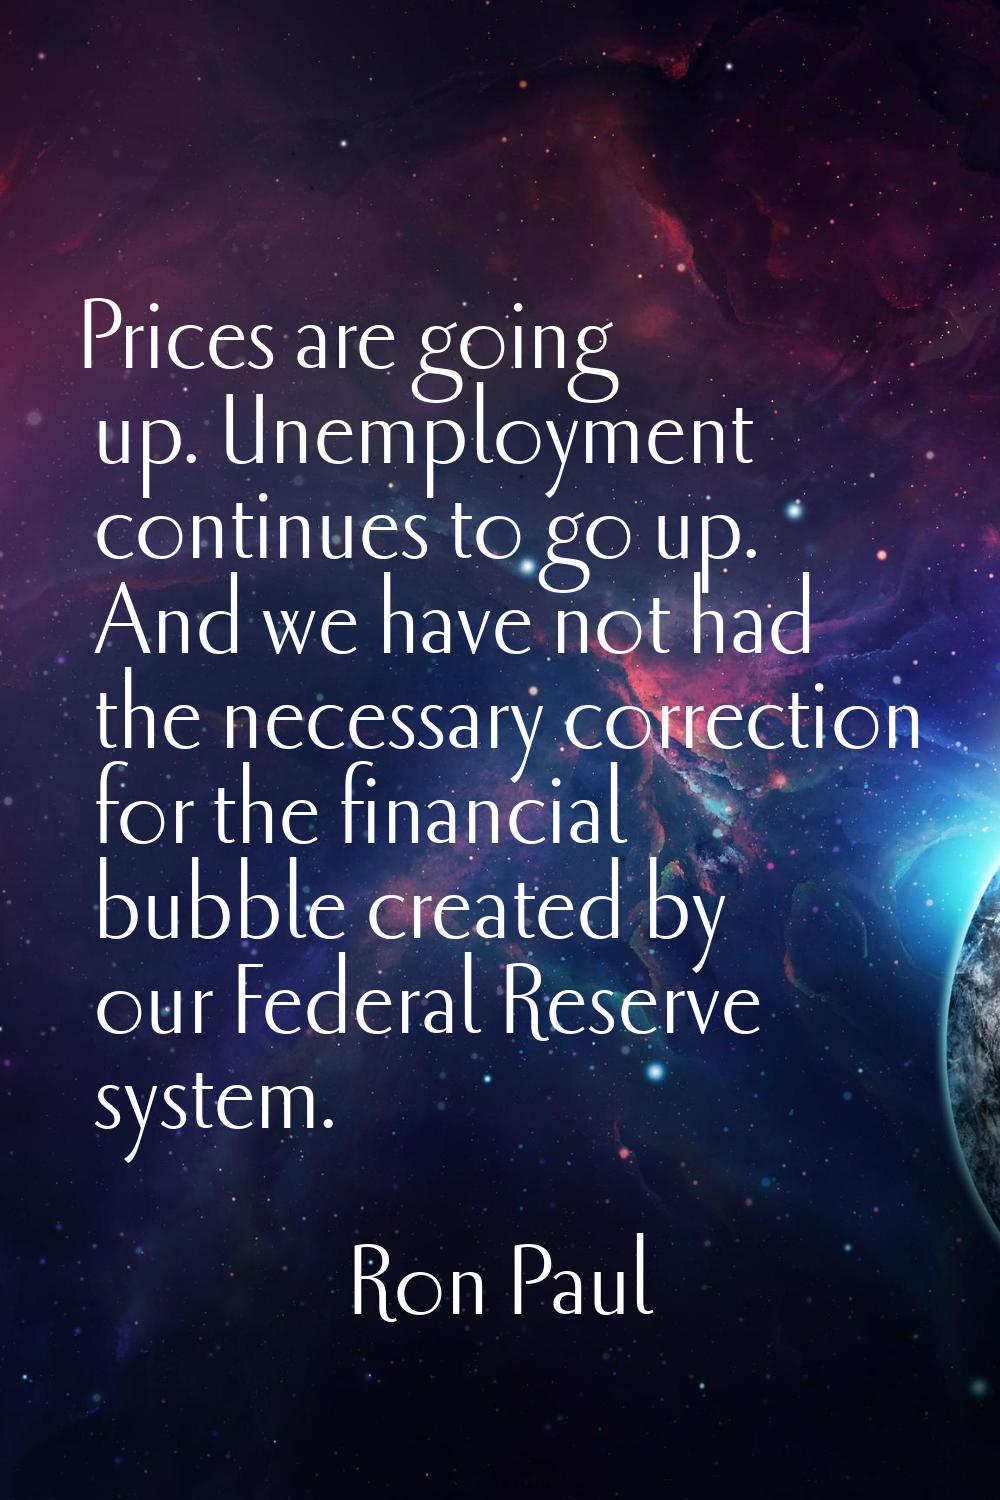 Prices are going up. Unemployment continues to go up. And we have not had the necessary correction 